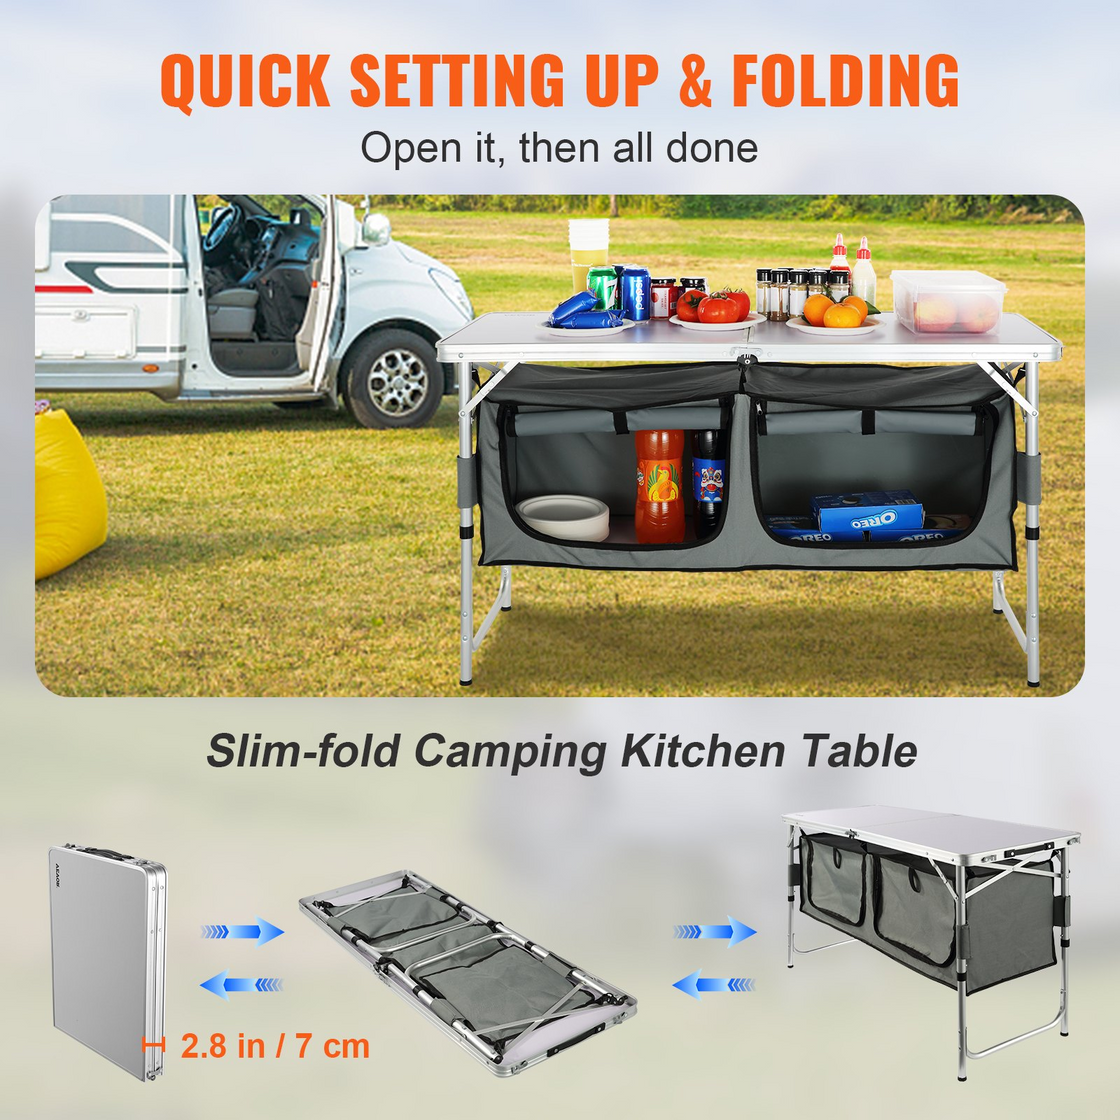 VEVOR Camping Kitchen Table, Quick set-up Folding Camping Table, 3 Adjustable Heights, MDF Camping Table, Ideal for Outdoor Picnics, BBQs, Camping, RV Traveling